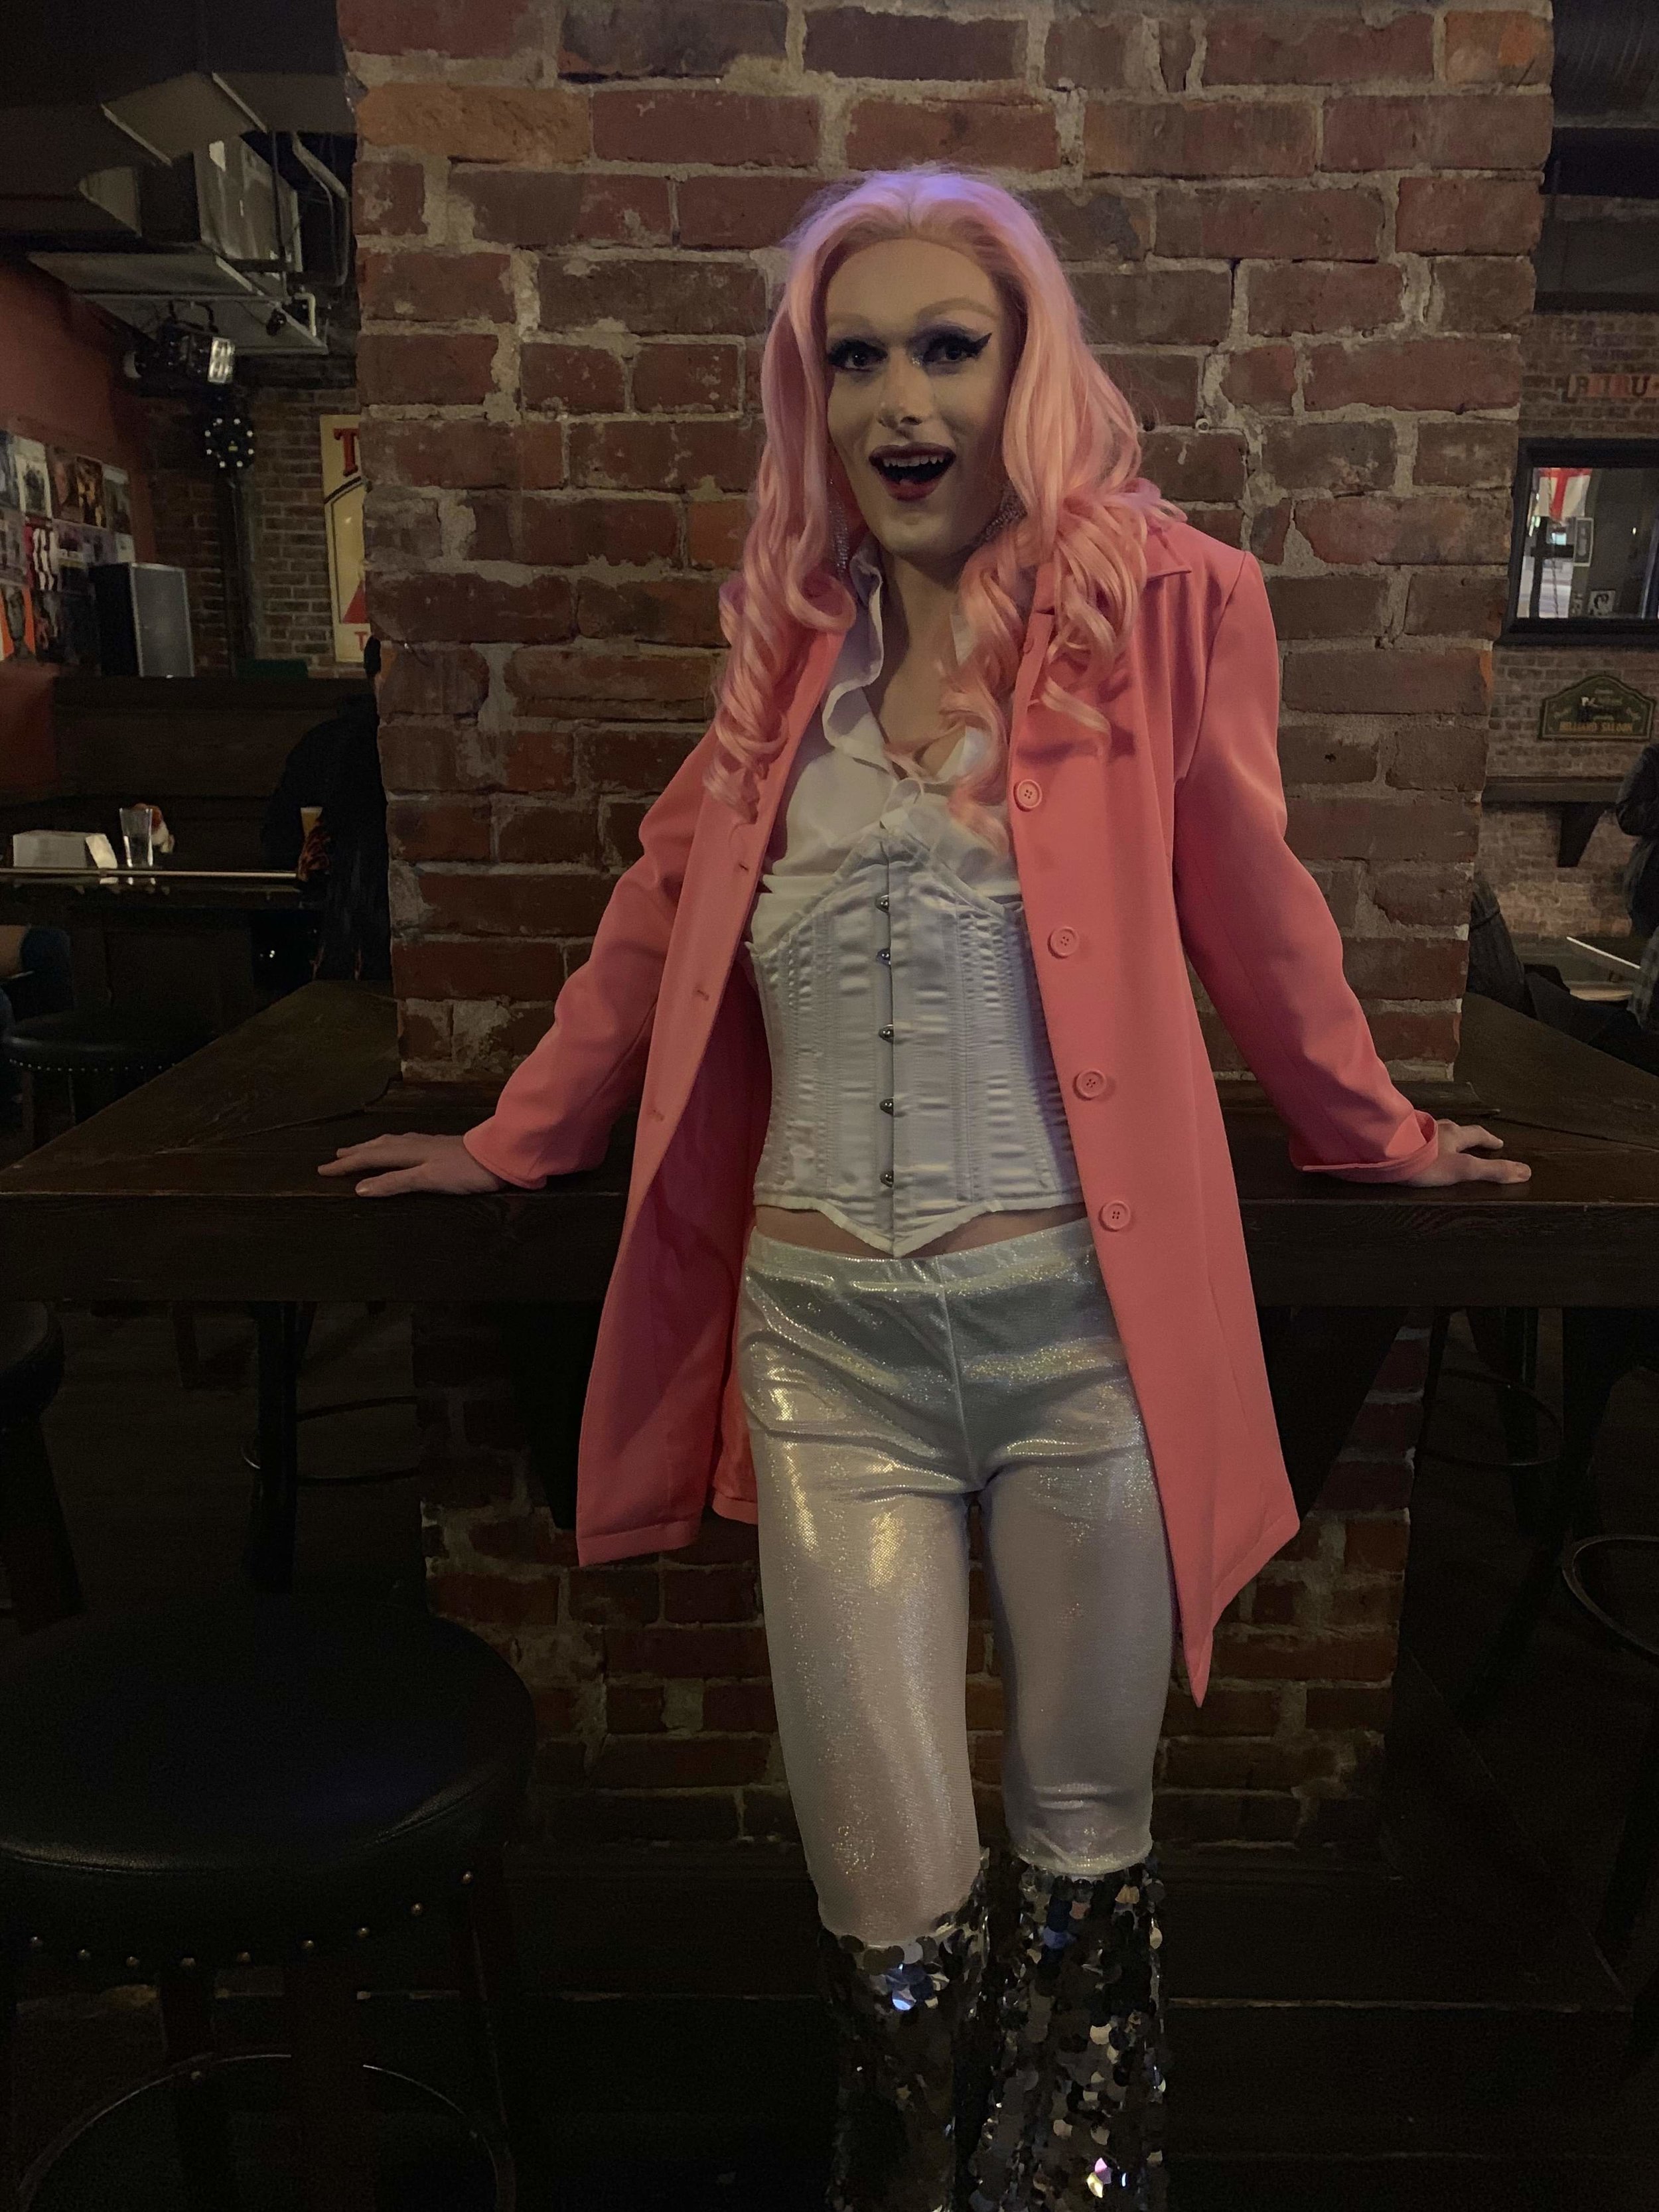 Maddoria - Maddoria, starting drag in highschool to attend prom, has made the switch from prom queen to full drag queen. Known mostly around UBC for her performances, never misses a chance to perform out and around town.